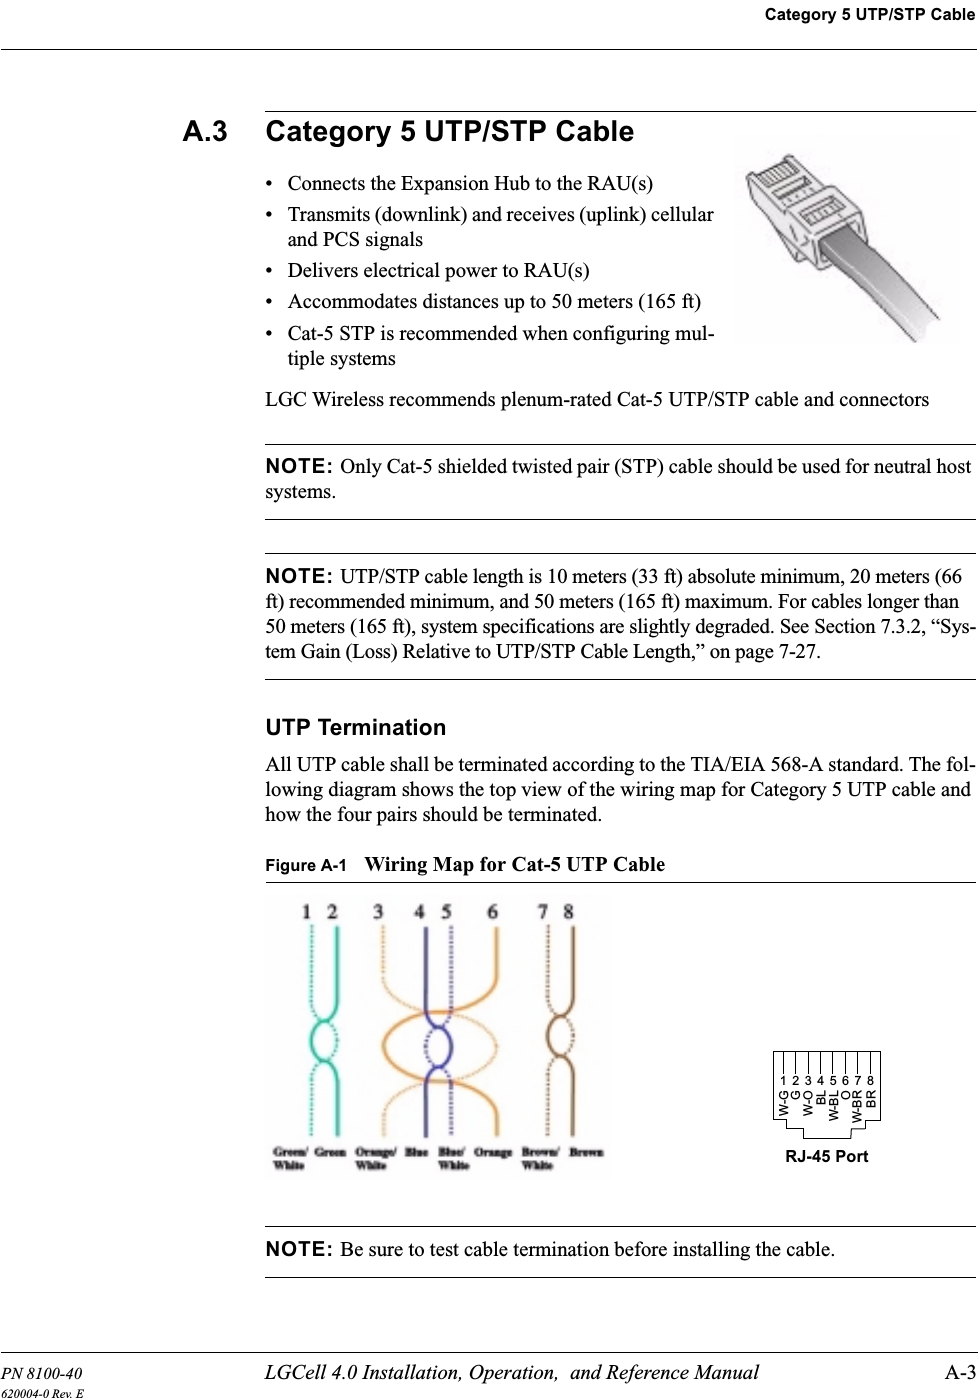 PN 8100-40 LGCell 4.0 Installation, Operation,  and Reference Manual A-3620004-0 Rev. ECategory 5 UTP/STP CableA.3 Category 5 UTP/STP Cable• Connects the Expansion Hub to the RAU(s)• Transmits (downlink) and receives (uplink) cellular and PCS signals• Delivers electrical power to RAU(s)• Accommodates distances up to 50 meters (165 ft)• Cat-5 STP is recommended when configuring mul-tiple systemsLGC Wireless recommends plenum-rated Cat-5 UTP/STP cable and connectorsNOTE: Only Cat-5 shielded twisted pair (STP) cable should be used for neutral host systems.NOTE: UTP/STP cable length is 10 meters (33 ft) absolute minimum, 20 meters (66 ft) recommended minimum, and 50 meters (165 ft) maximum. For cables longer than 50 meters (165 ft), system specifications are slightly degraded. See Section 7.3.2, “Sys-tem Gain (Loss) Relative to UTP/STP Cable Length,” on page 7-27.UTP TerminationAll UTP cable shall be terminated according to the TIA/EIA 568-A standard. The fol-lowing diagram shows the top view of the wiring map for Category 5 UTP cable and how the four pairs should be terminated.Figure A-1 Wiring Map for Cat-5 UTP CableNOTE: Be sure to test cable termination before installing the cable.RJ-45 Port12345678W-GGW-OBLW-BLOW-BRBR